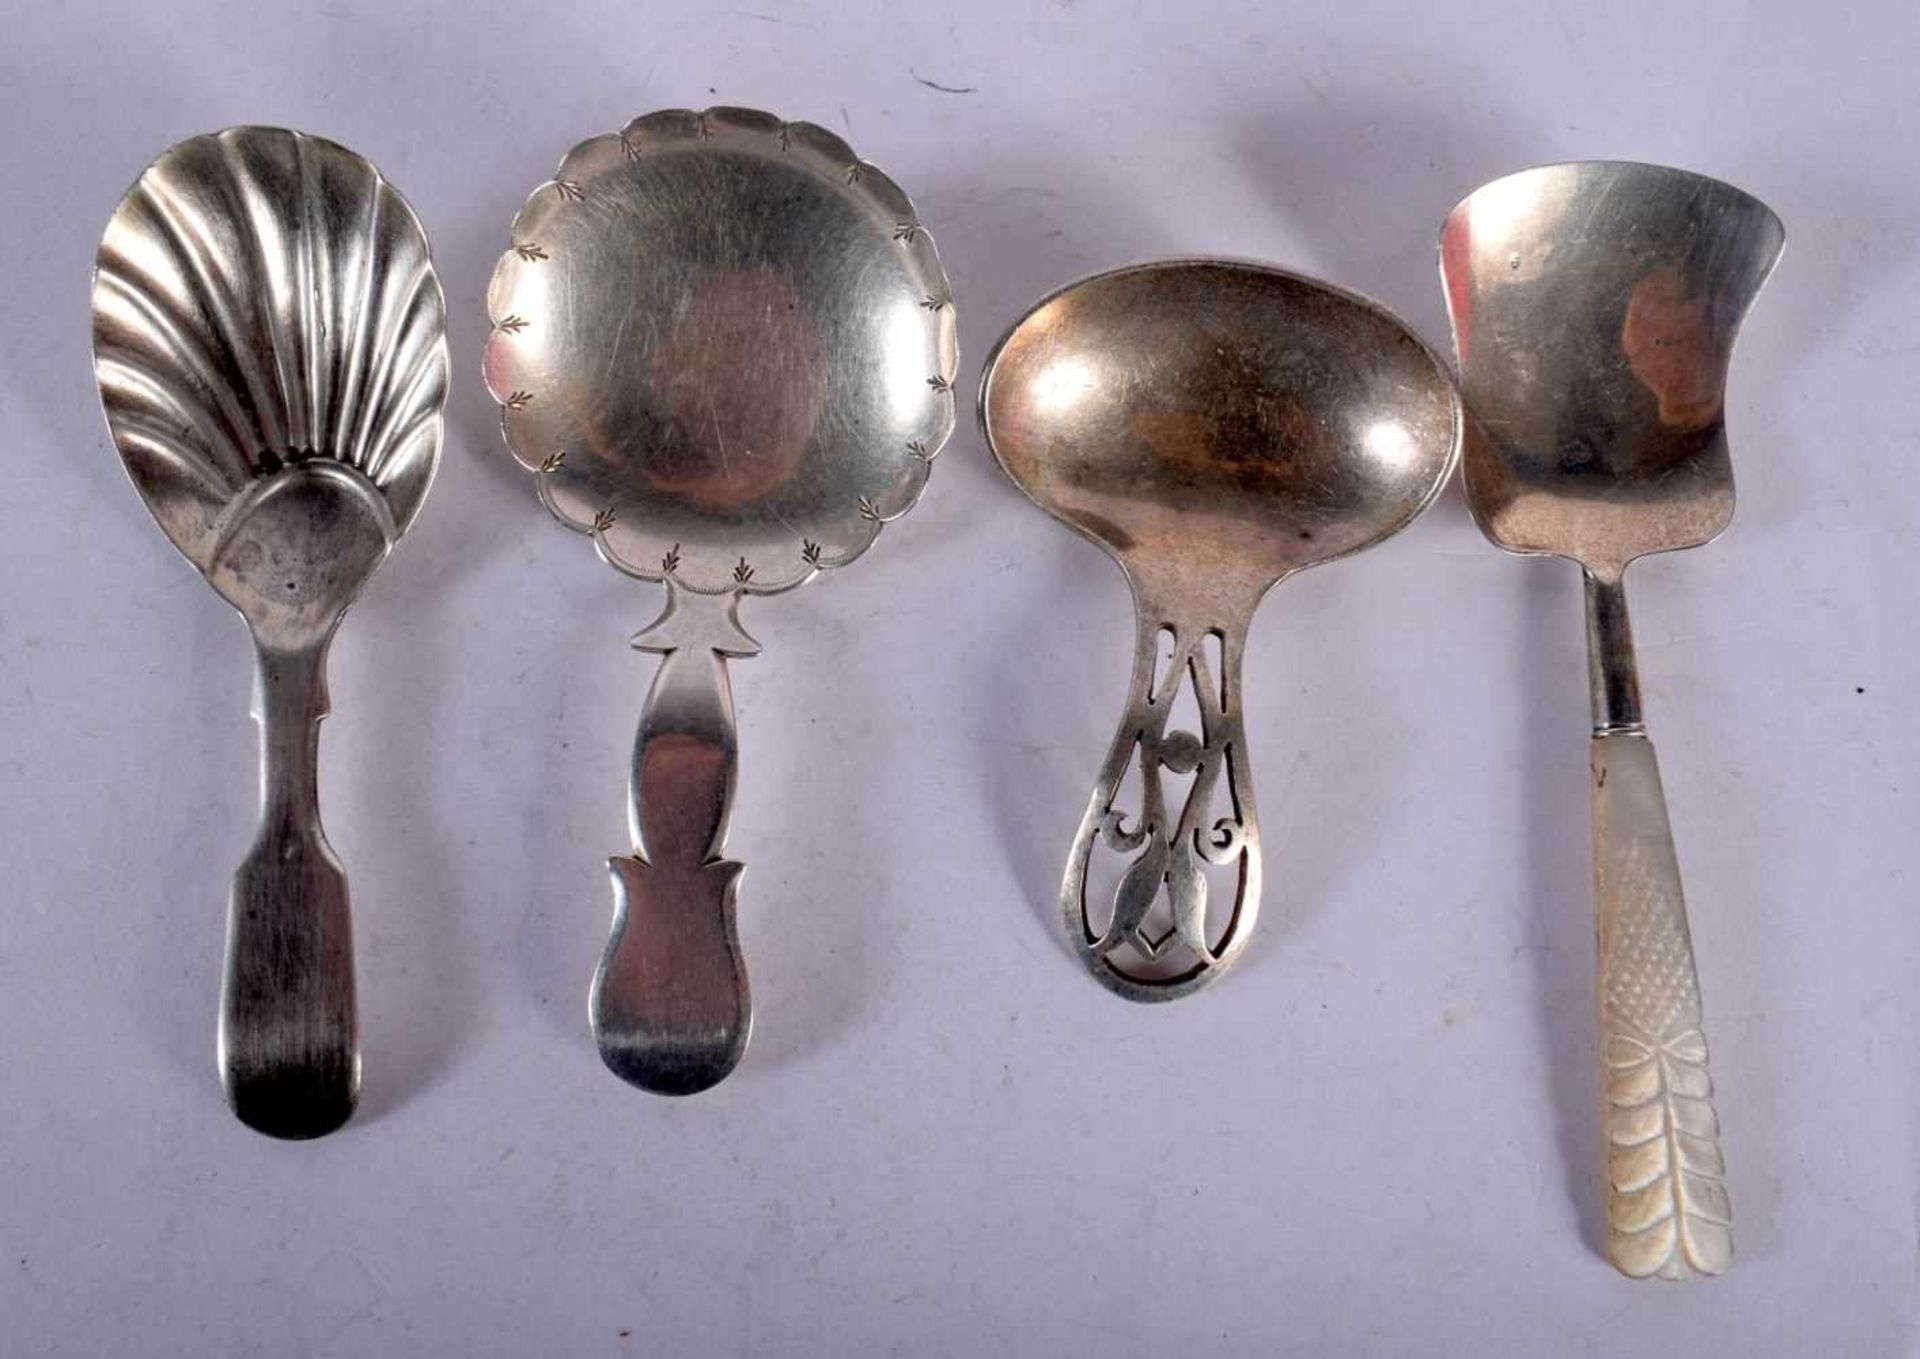 Four Silver Caddy Spoons, Hallmarks include London 1855, total weight 60g (4). Good Condition